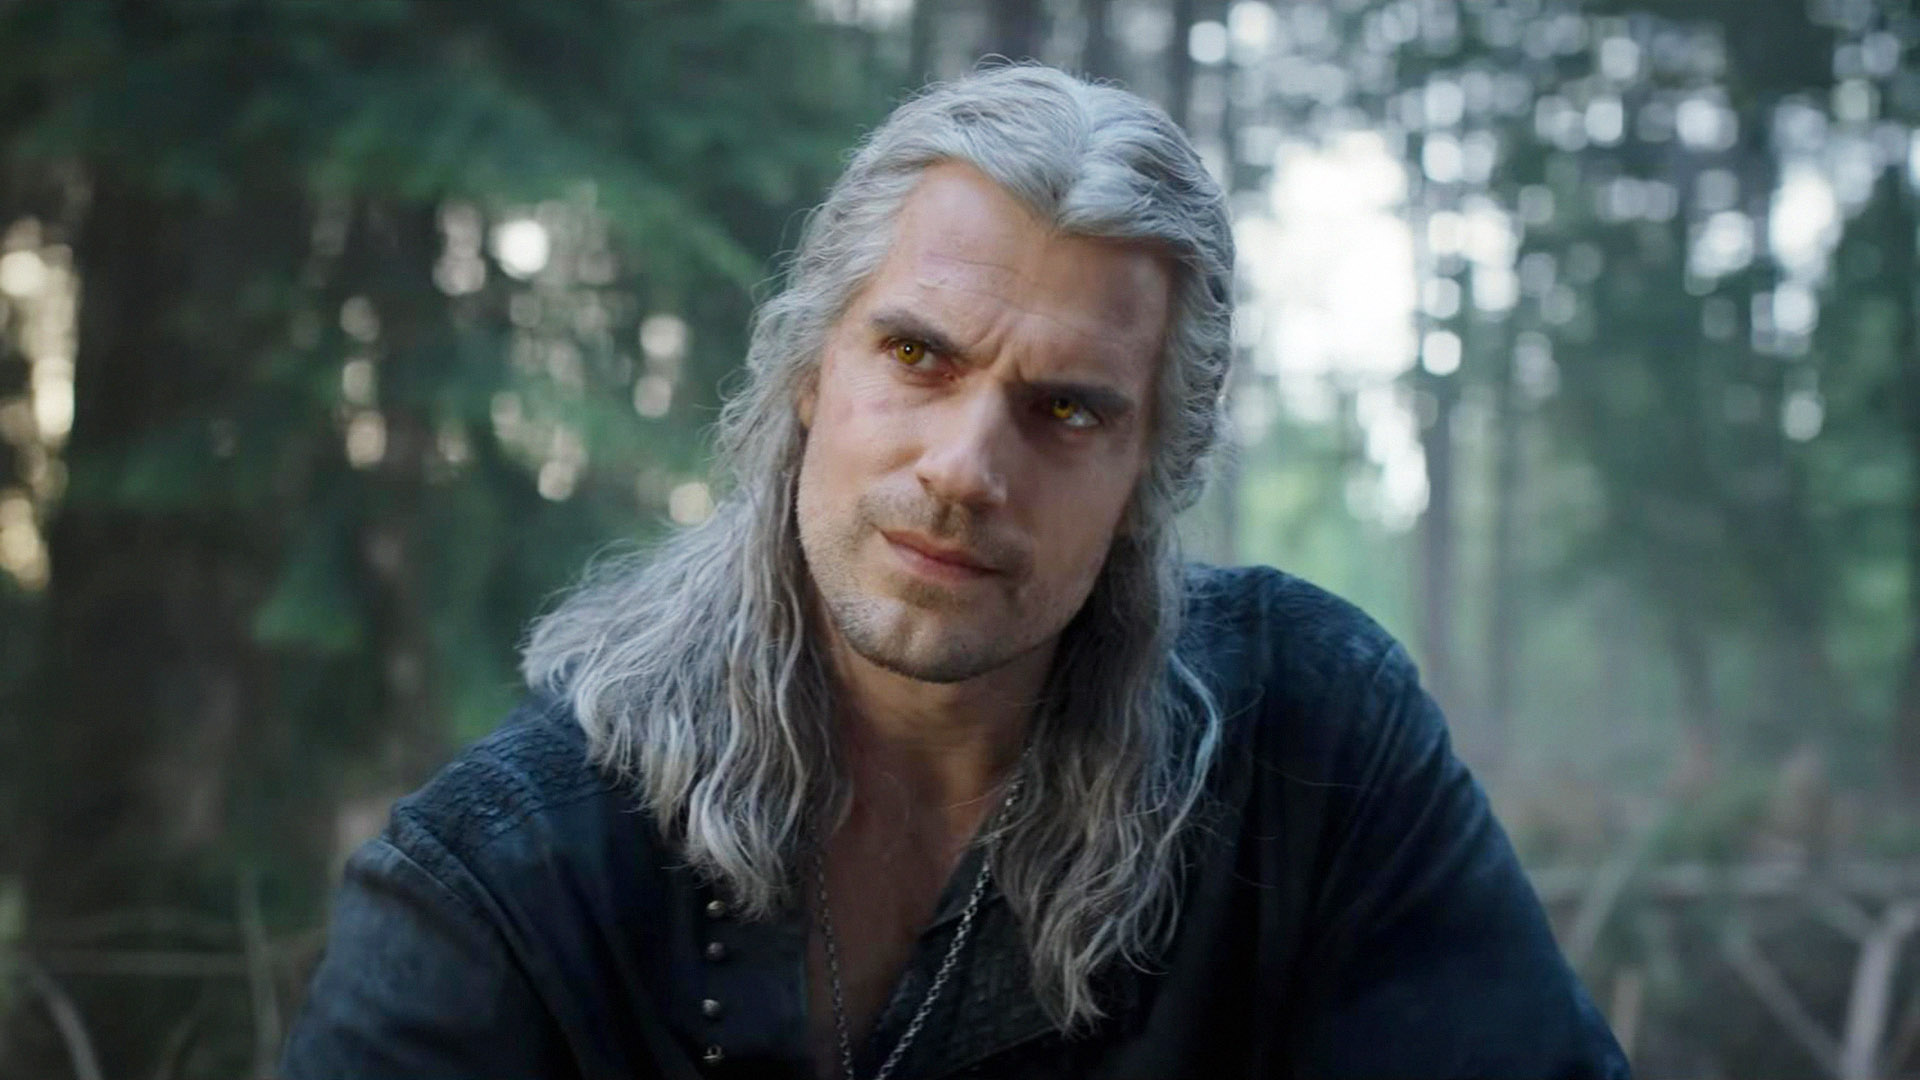 The Witcher Season 3 Part 1 Episode Guide: Plot, Release Date & How to Watch